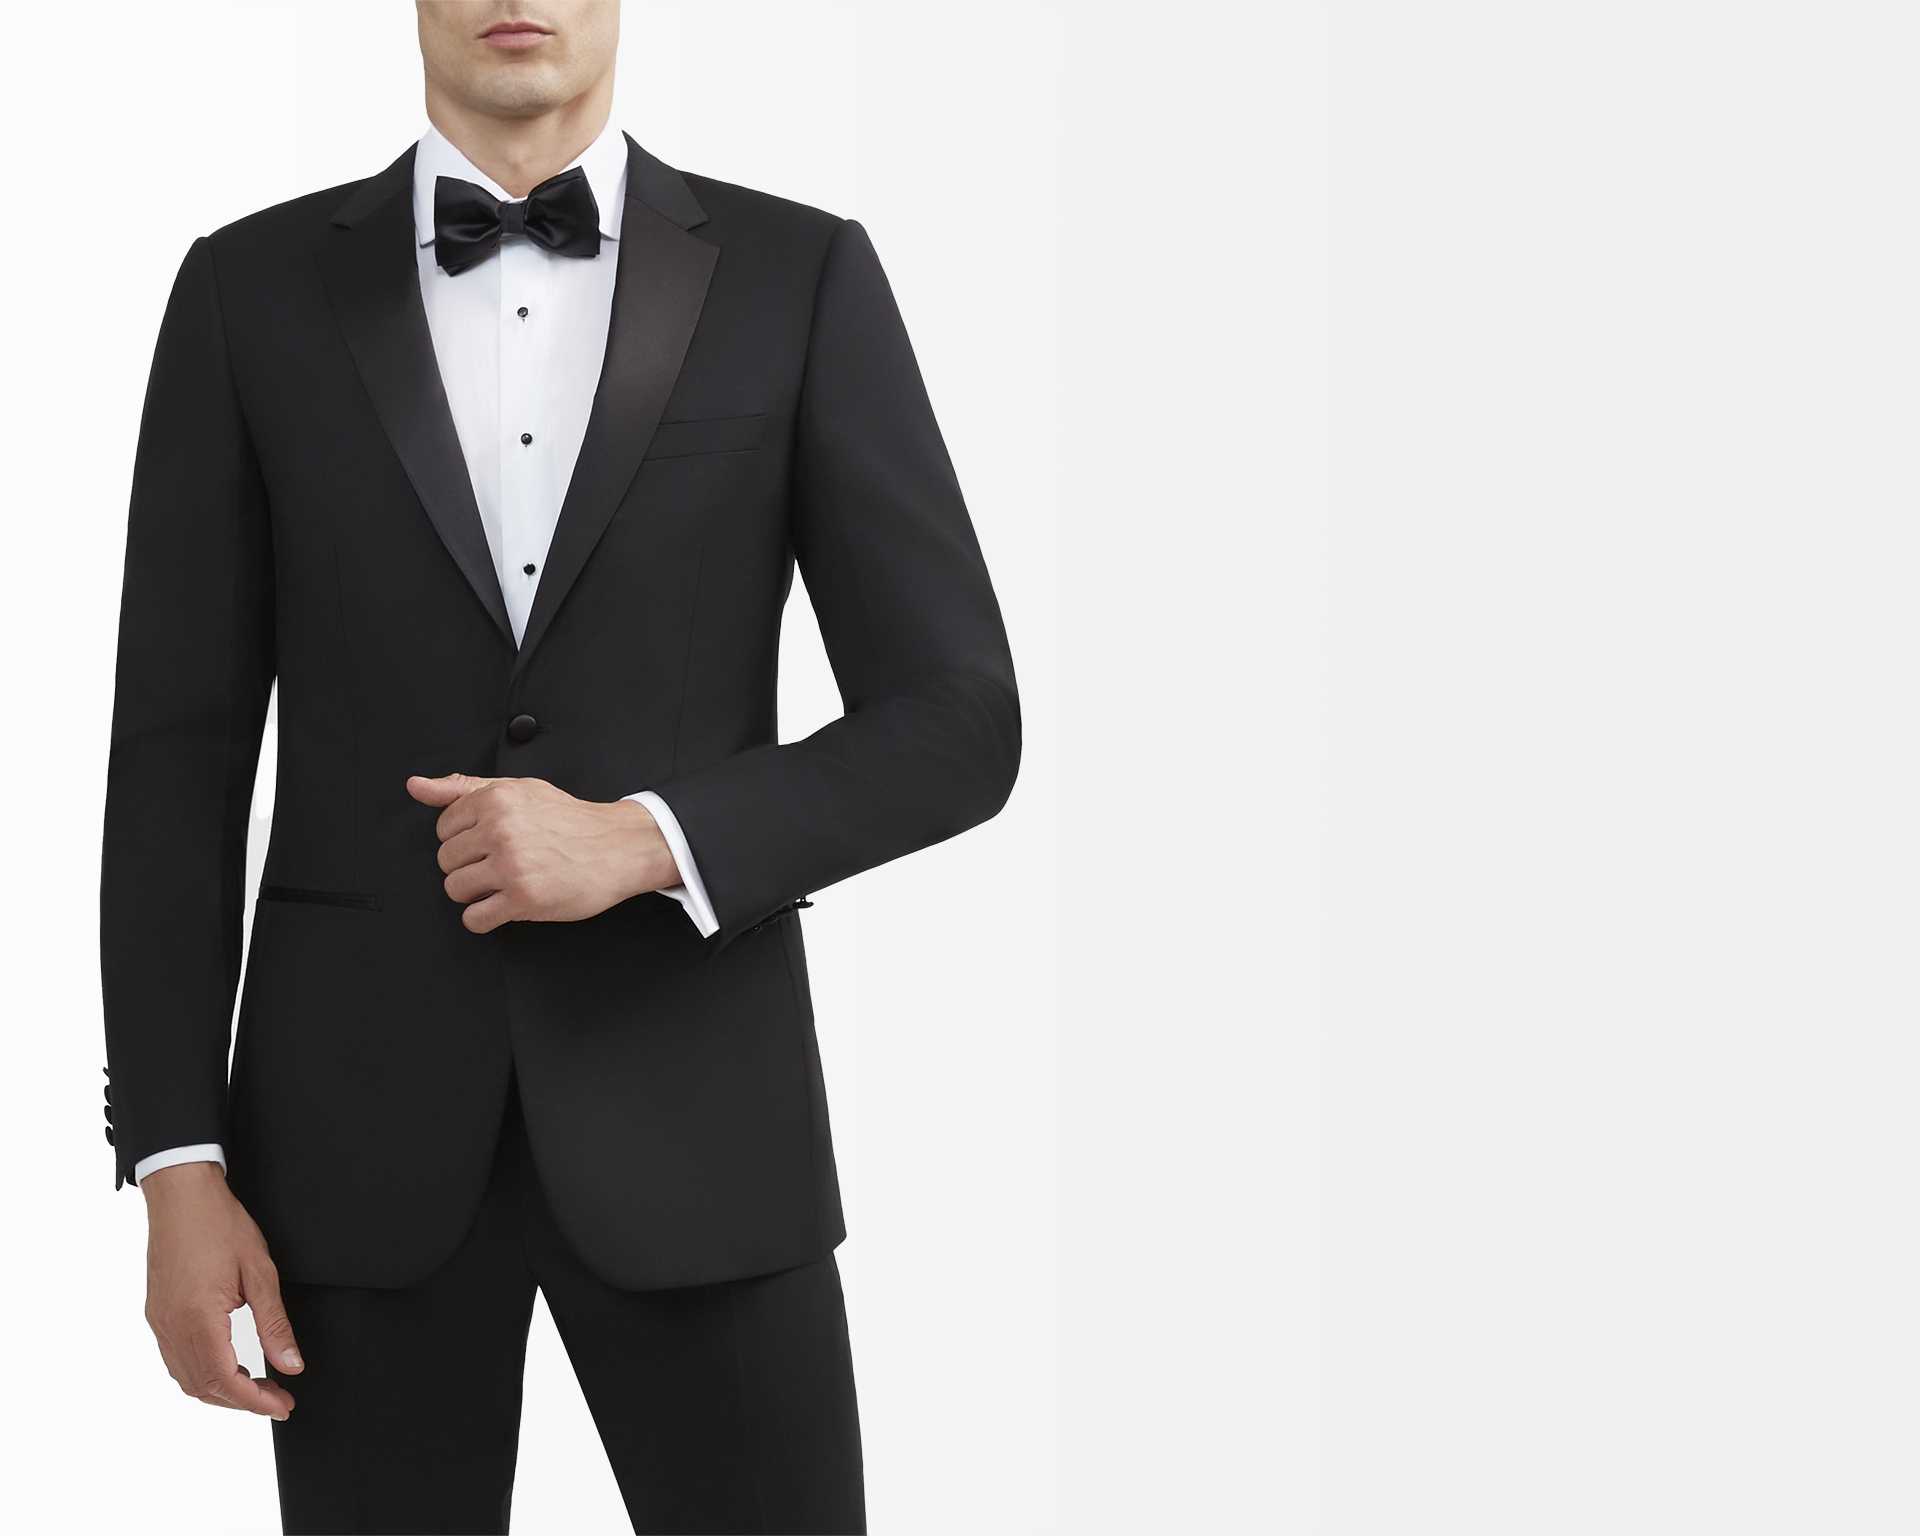 Shop for best tuxedos in New York City